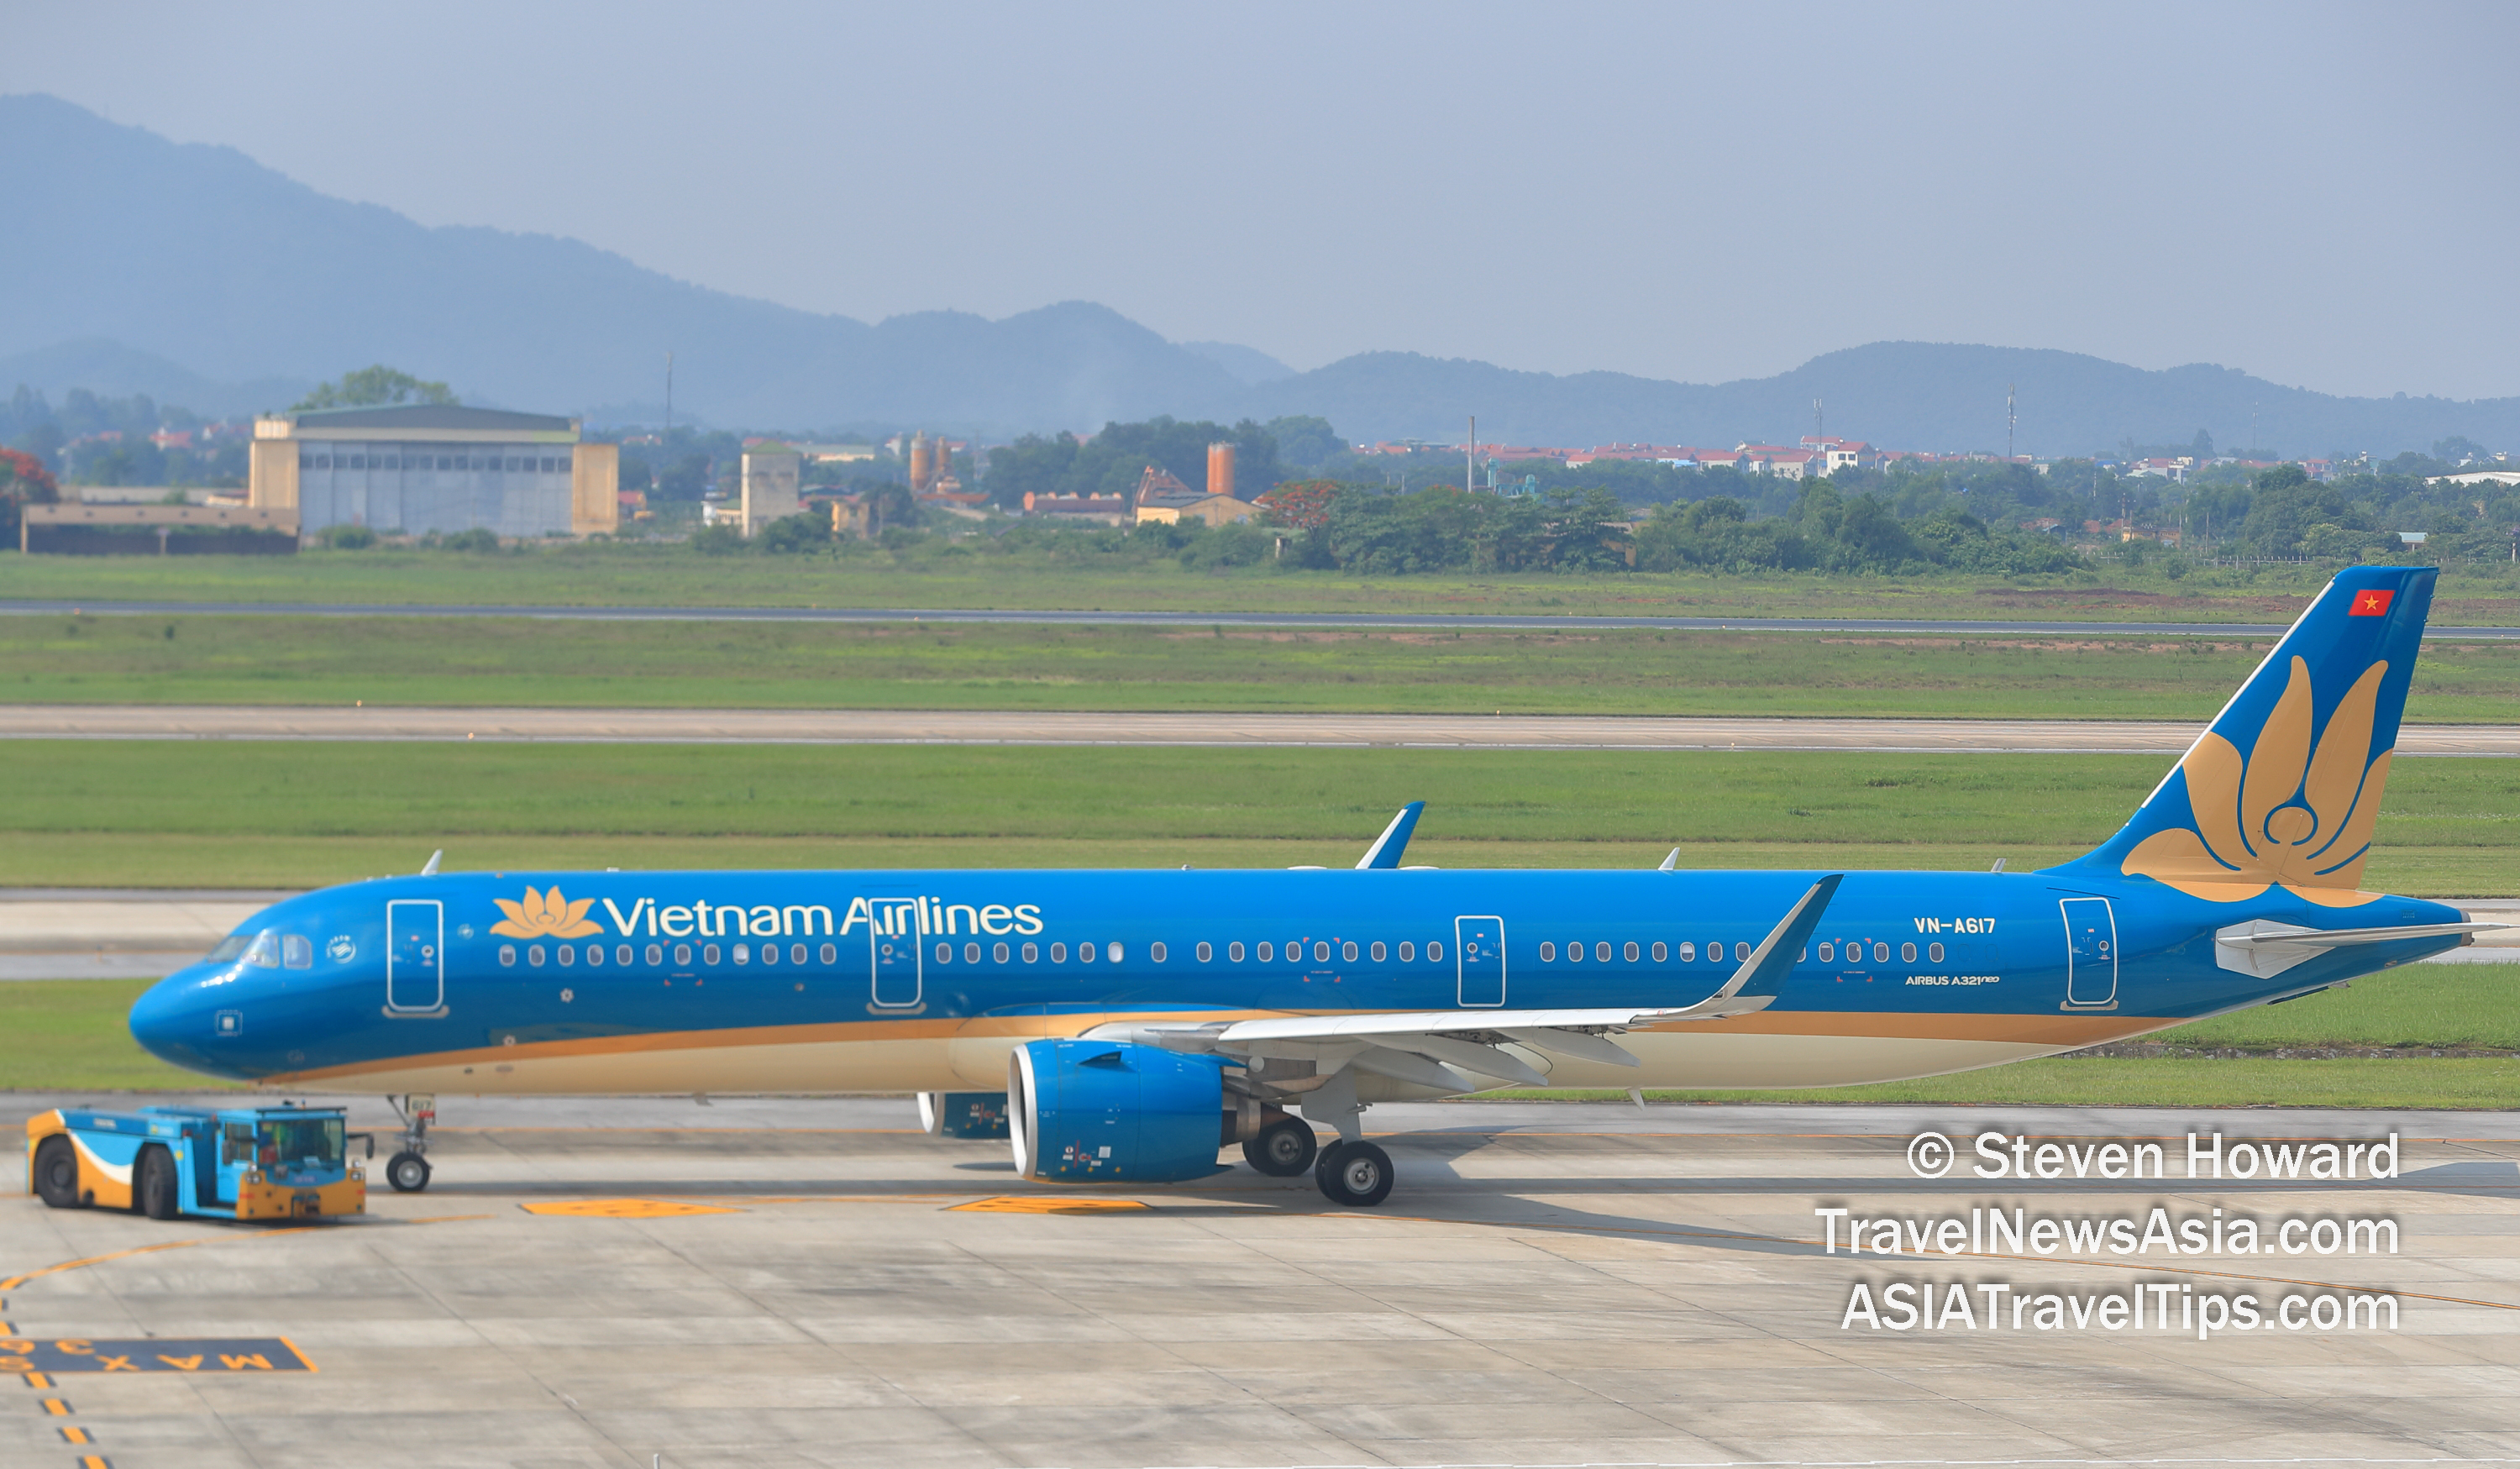 Vietnam Airlines Airbus A321neo VNA617. Picture by Steven Howard of TravelNewsAsia.com Click to enlarge.